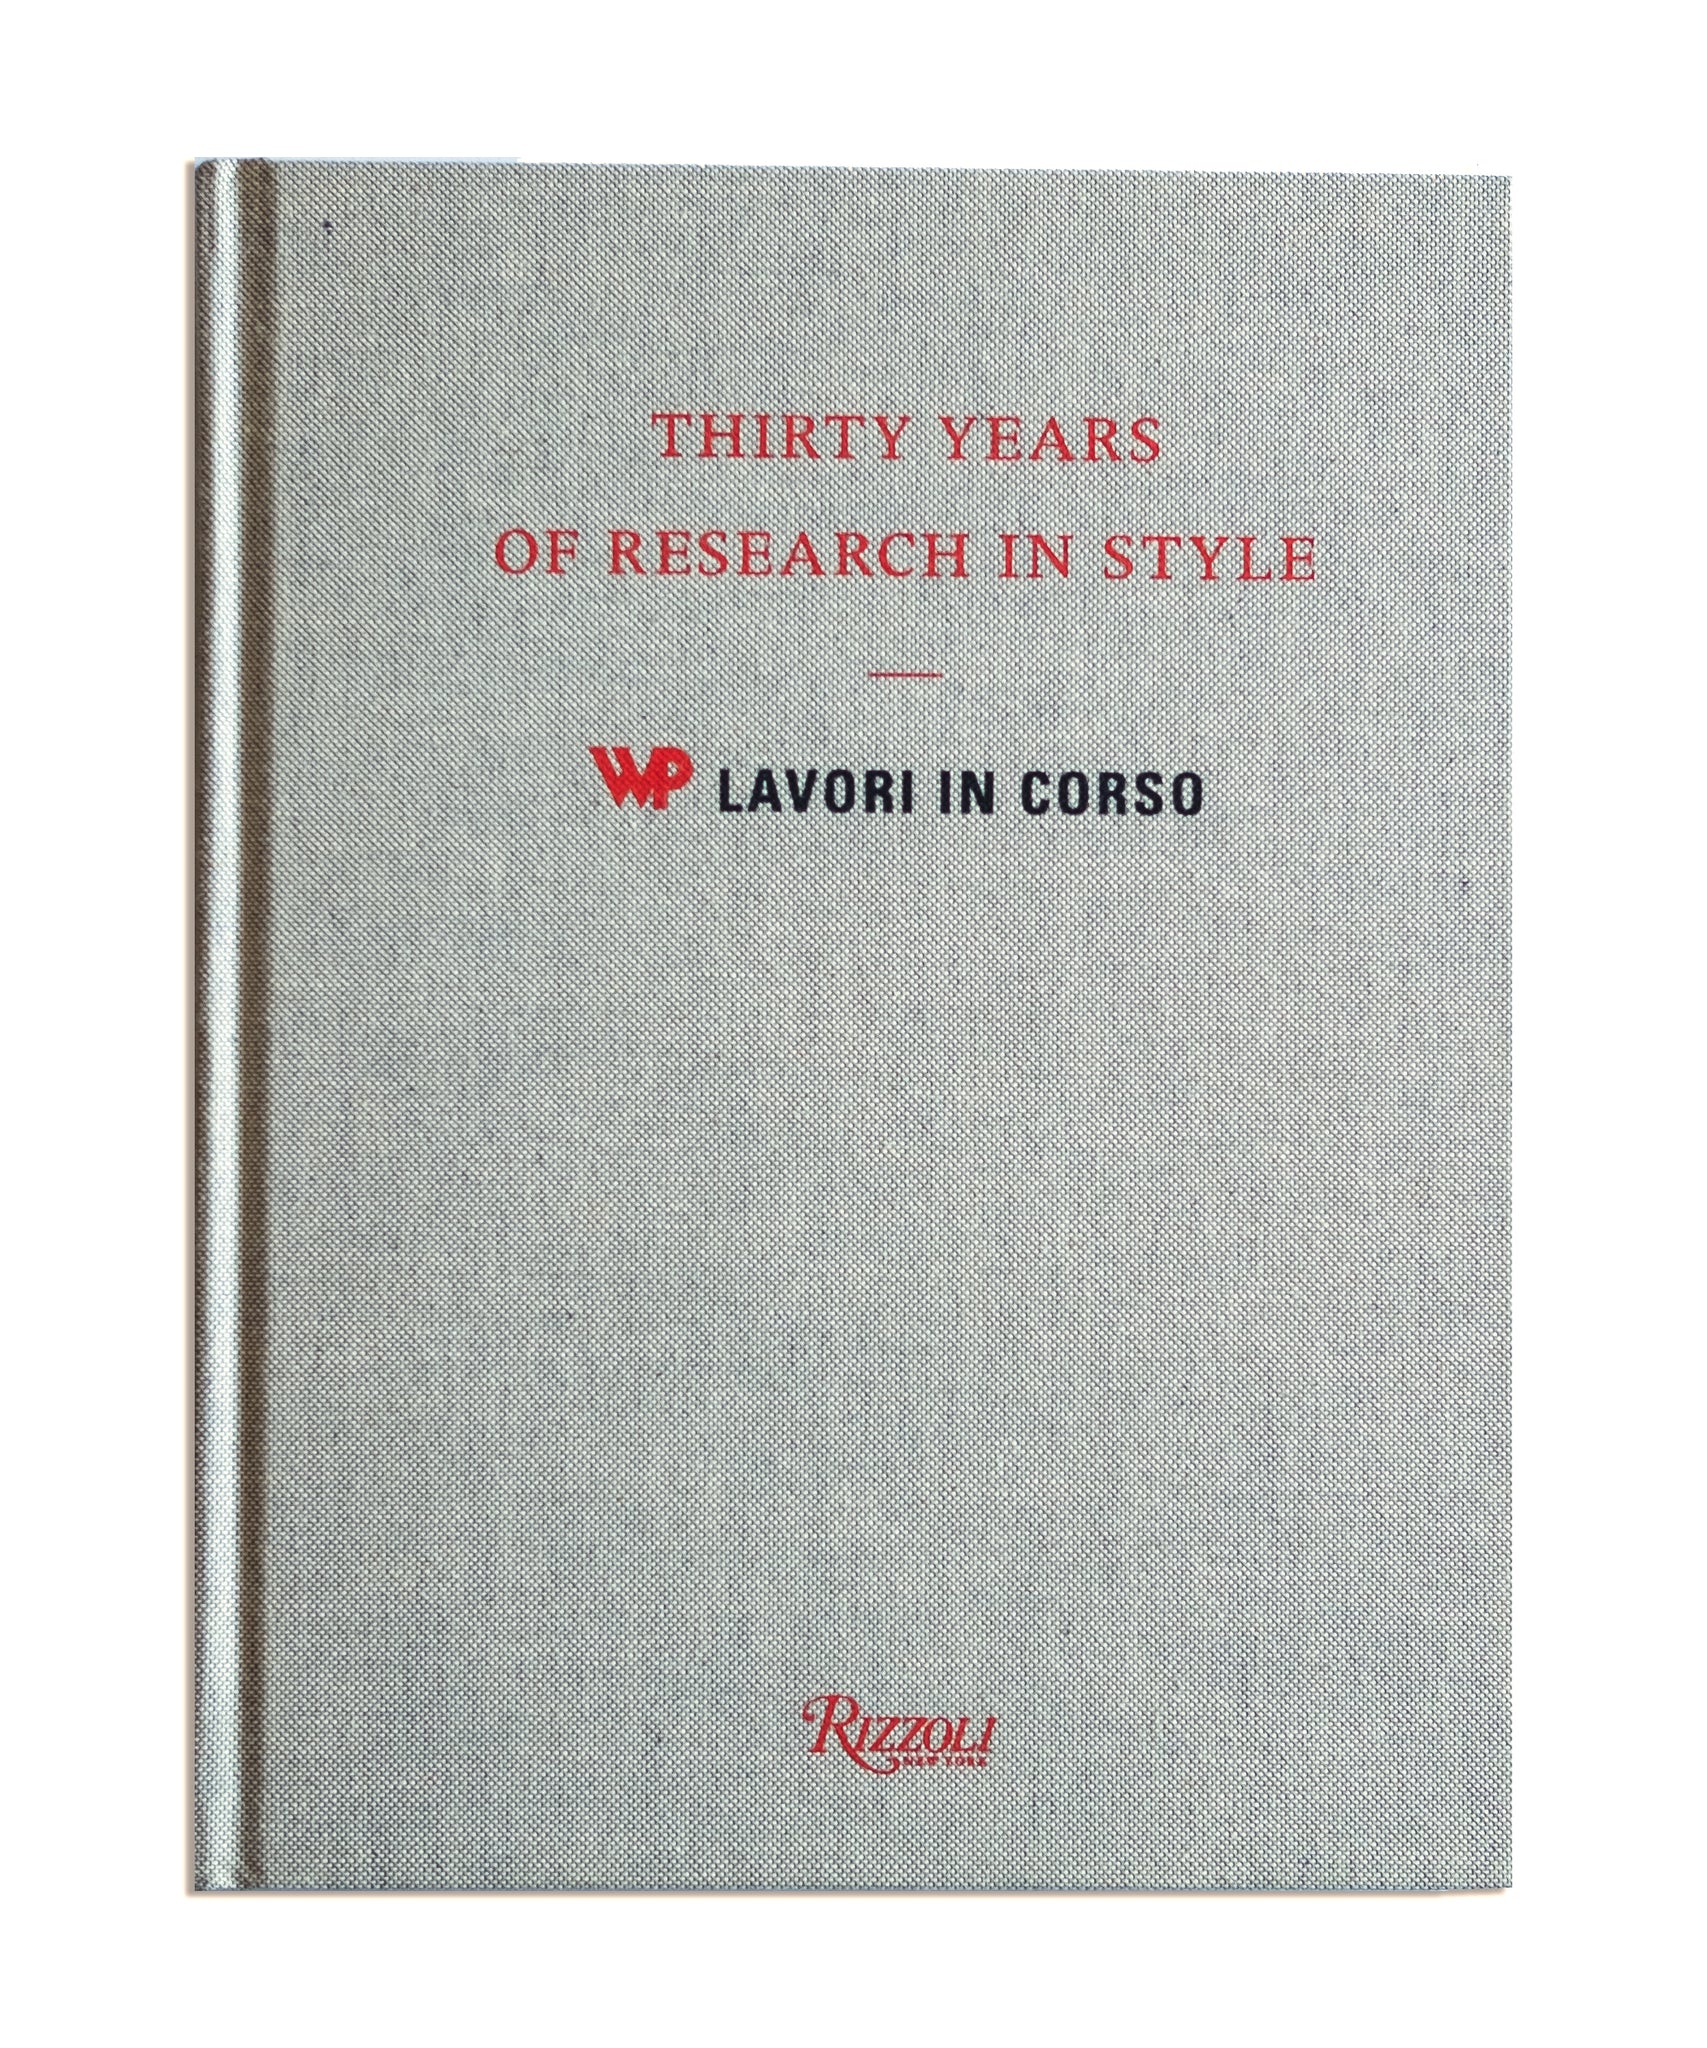 30 Years of Research in Style. WP Lavori in Corso